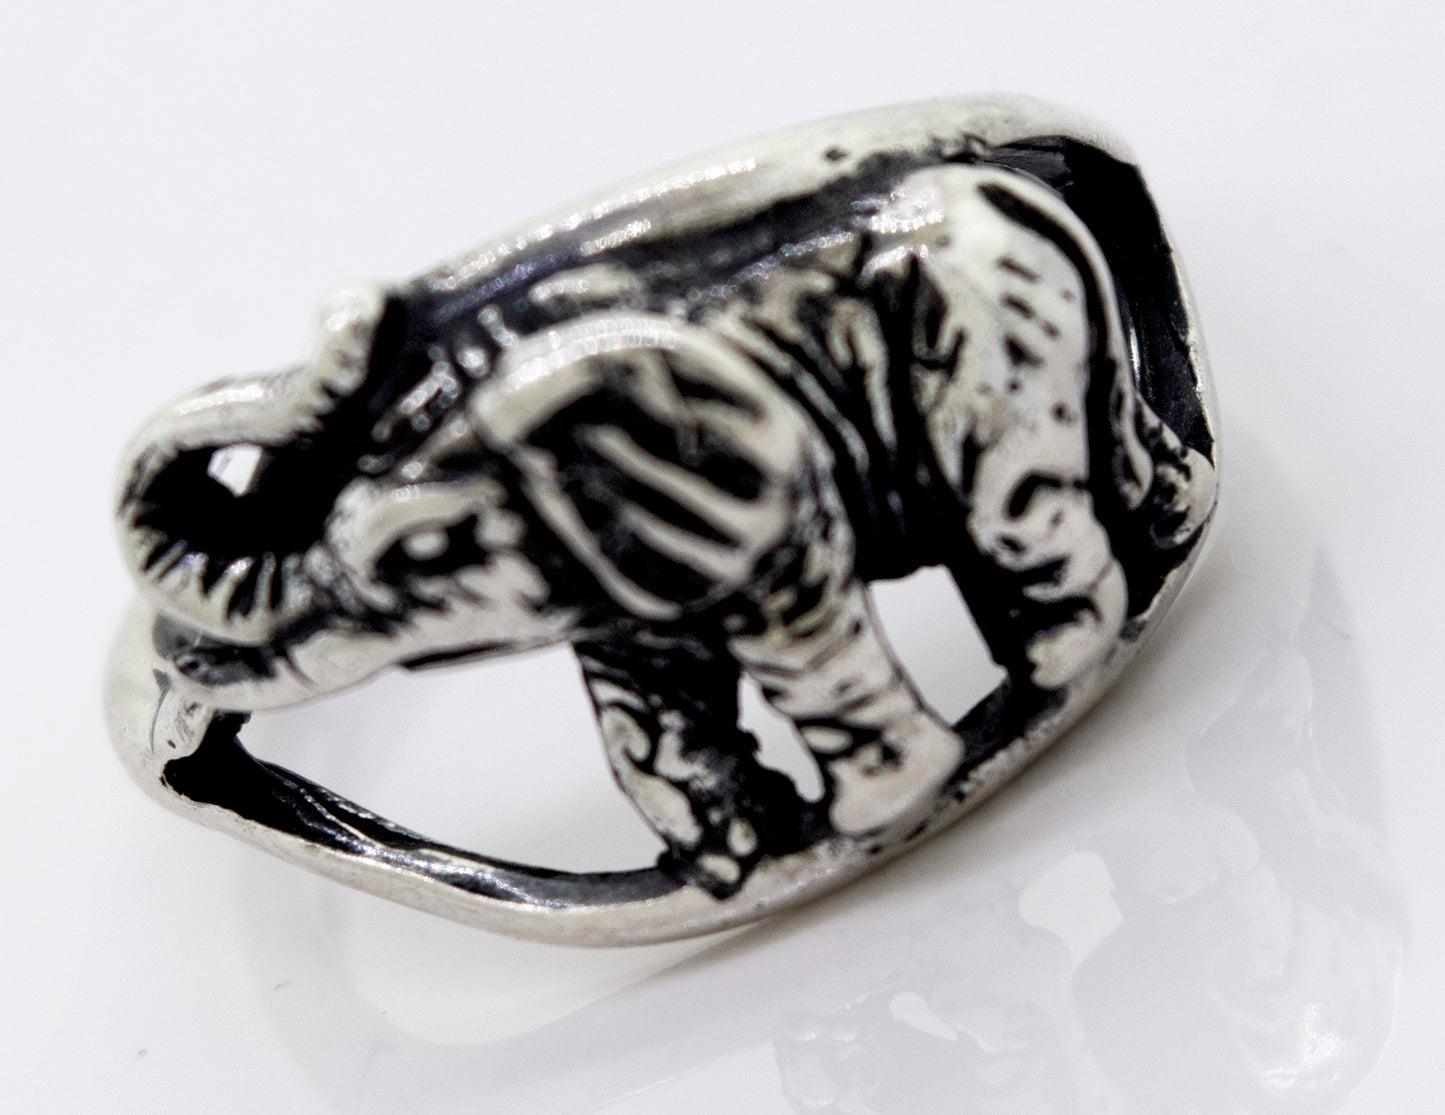 An American Made Elephant Ring on a white surface.